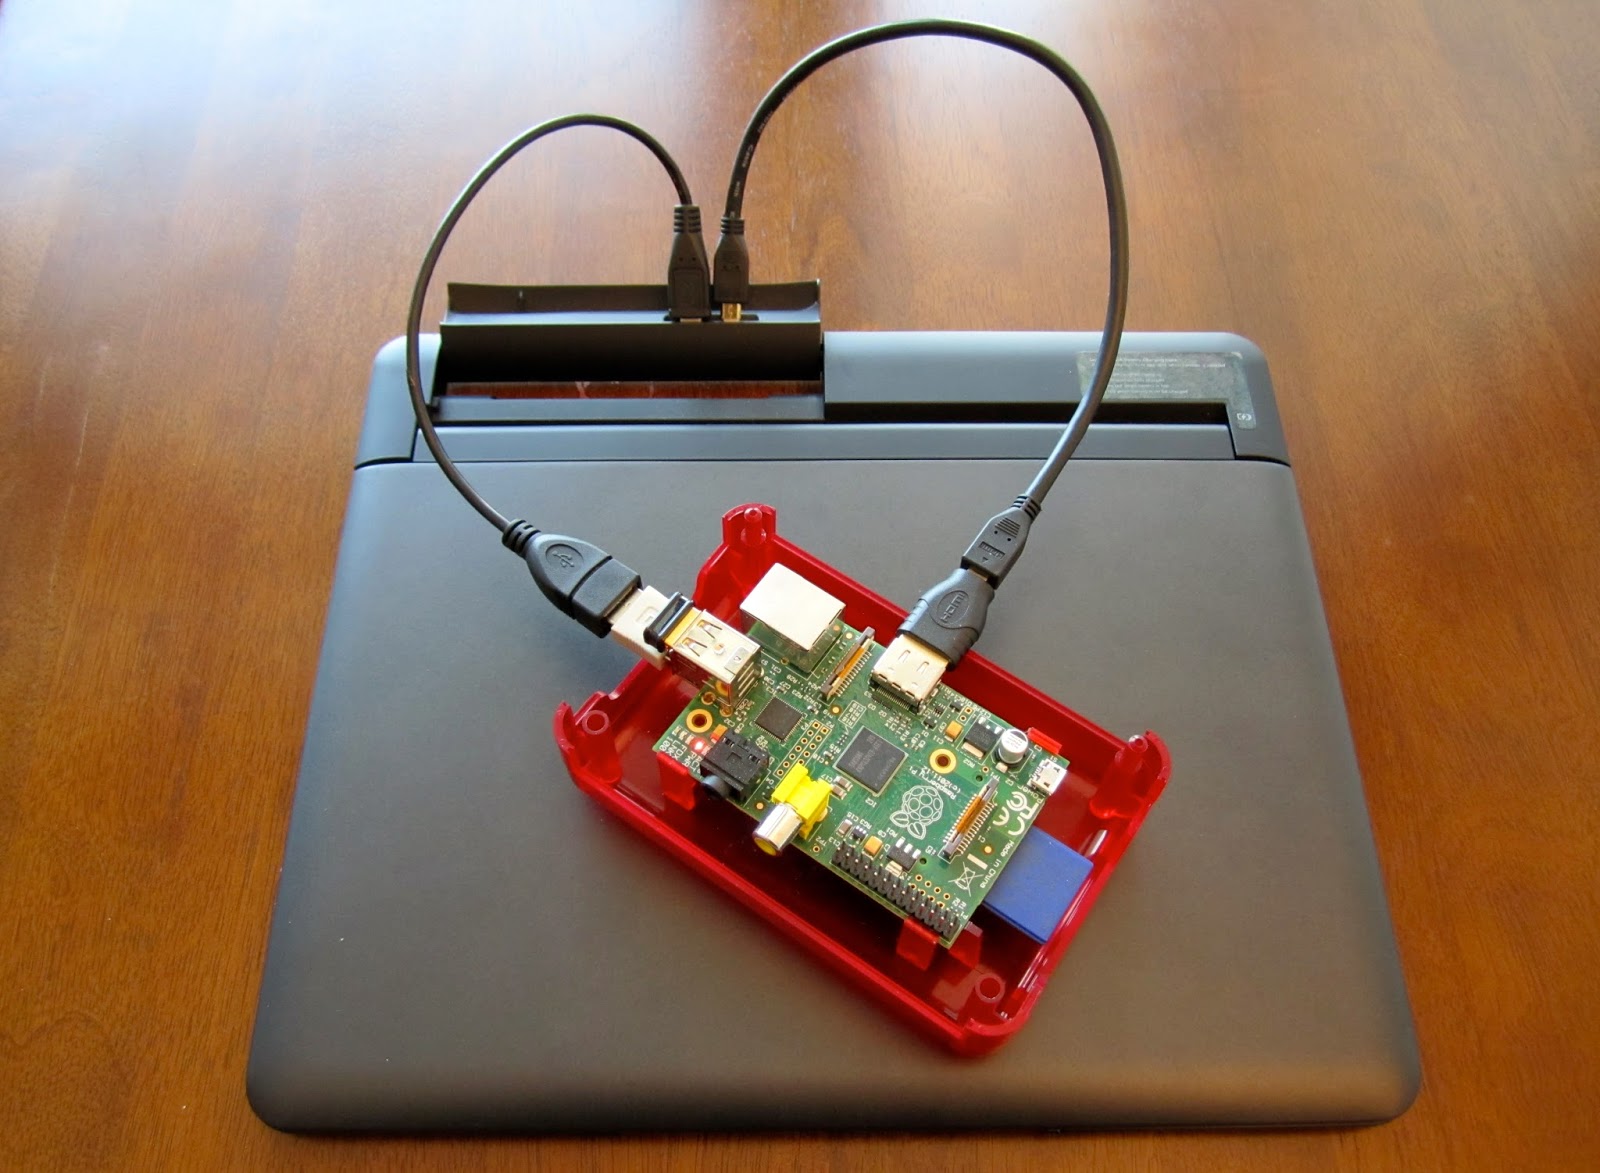 plotseling Bederven tapijt How to Make a Raspberry Pi Laptop with a Discontinued Moto Lapdock